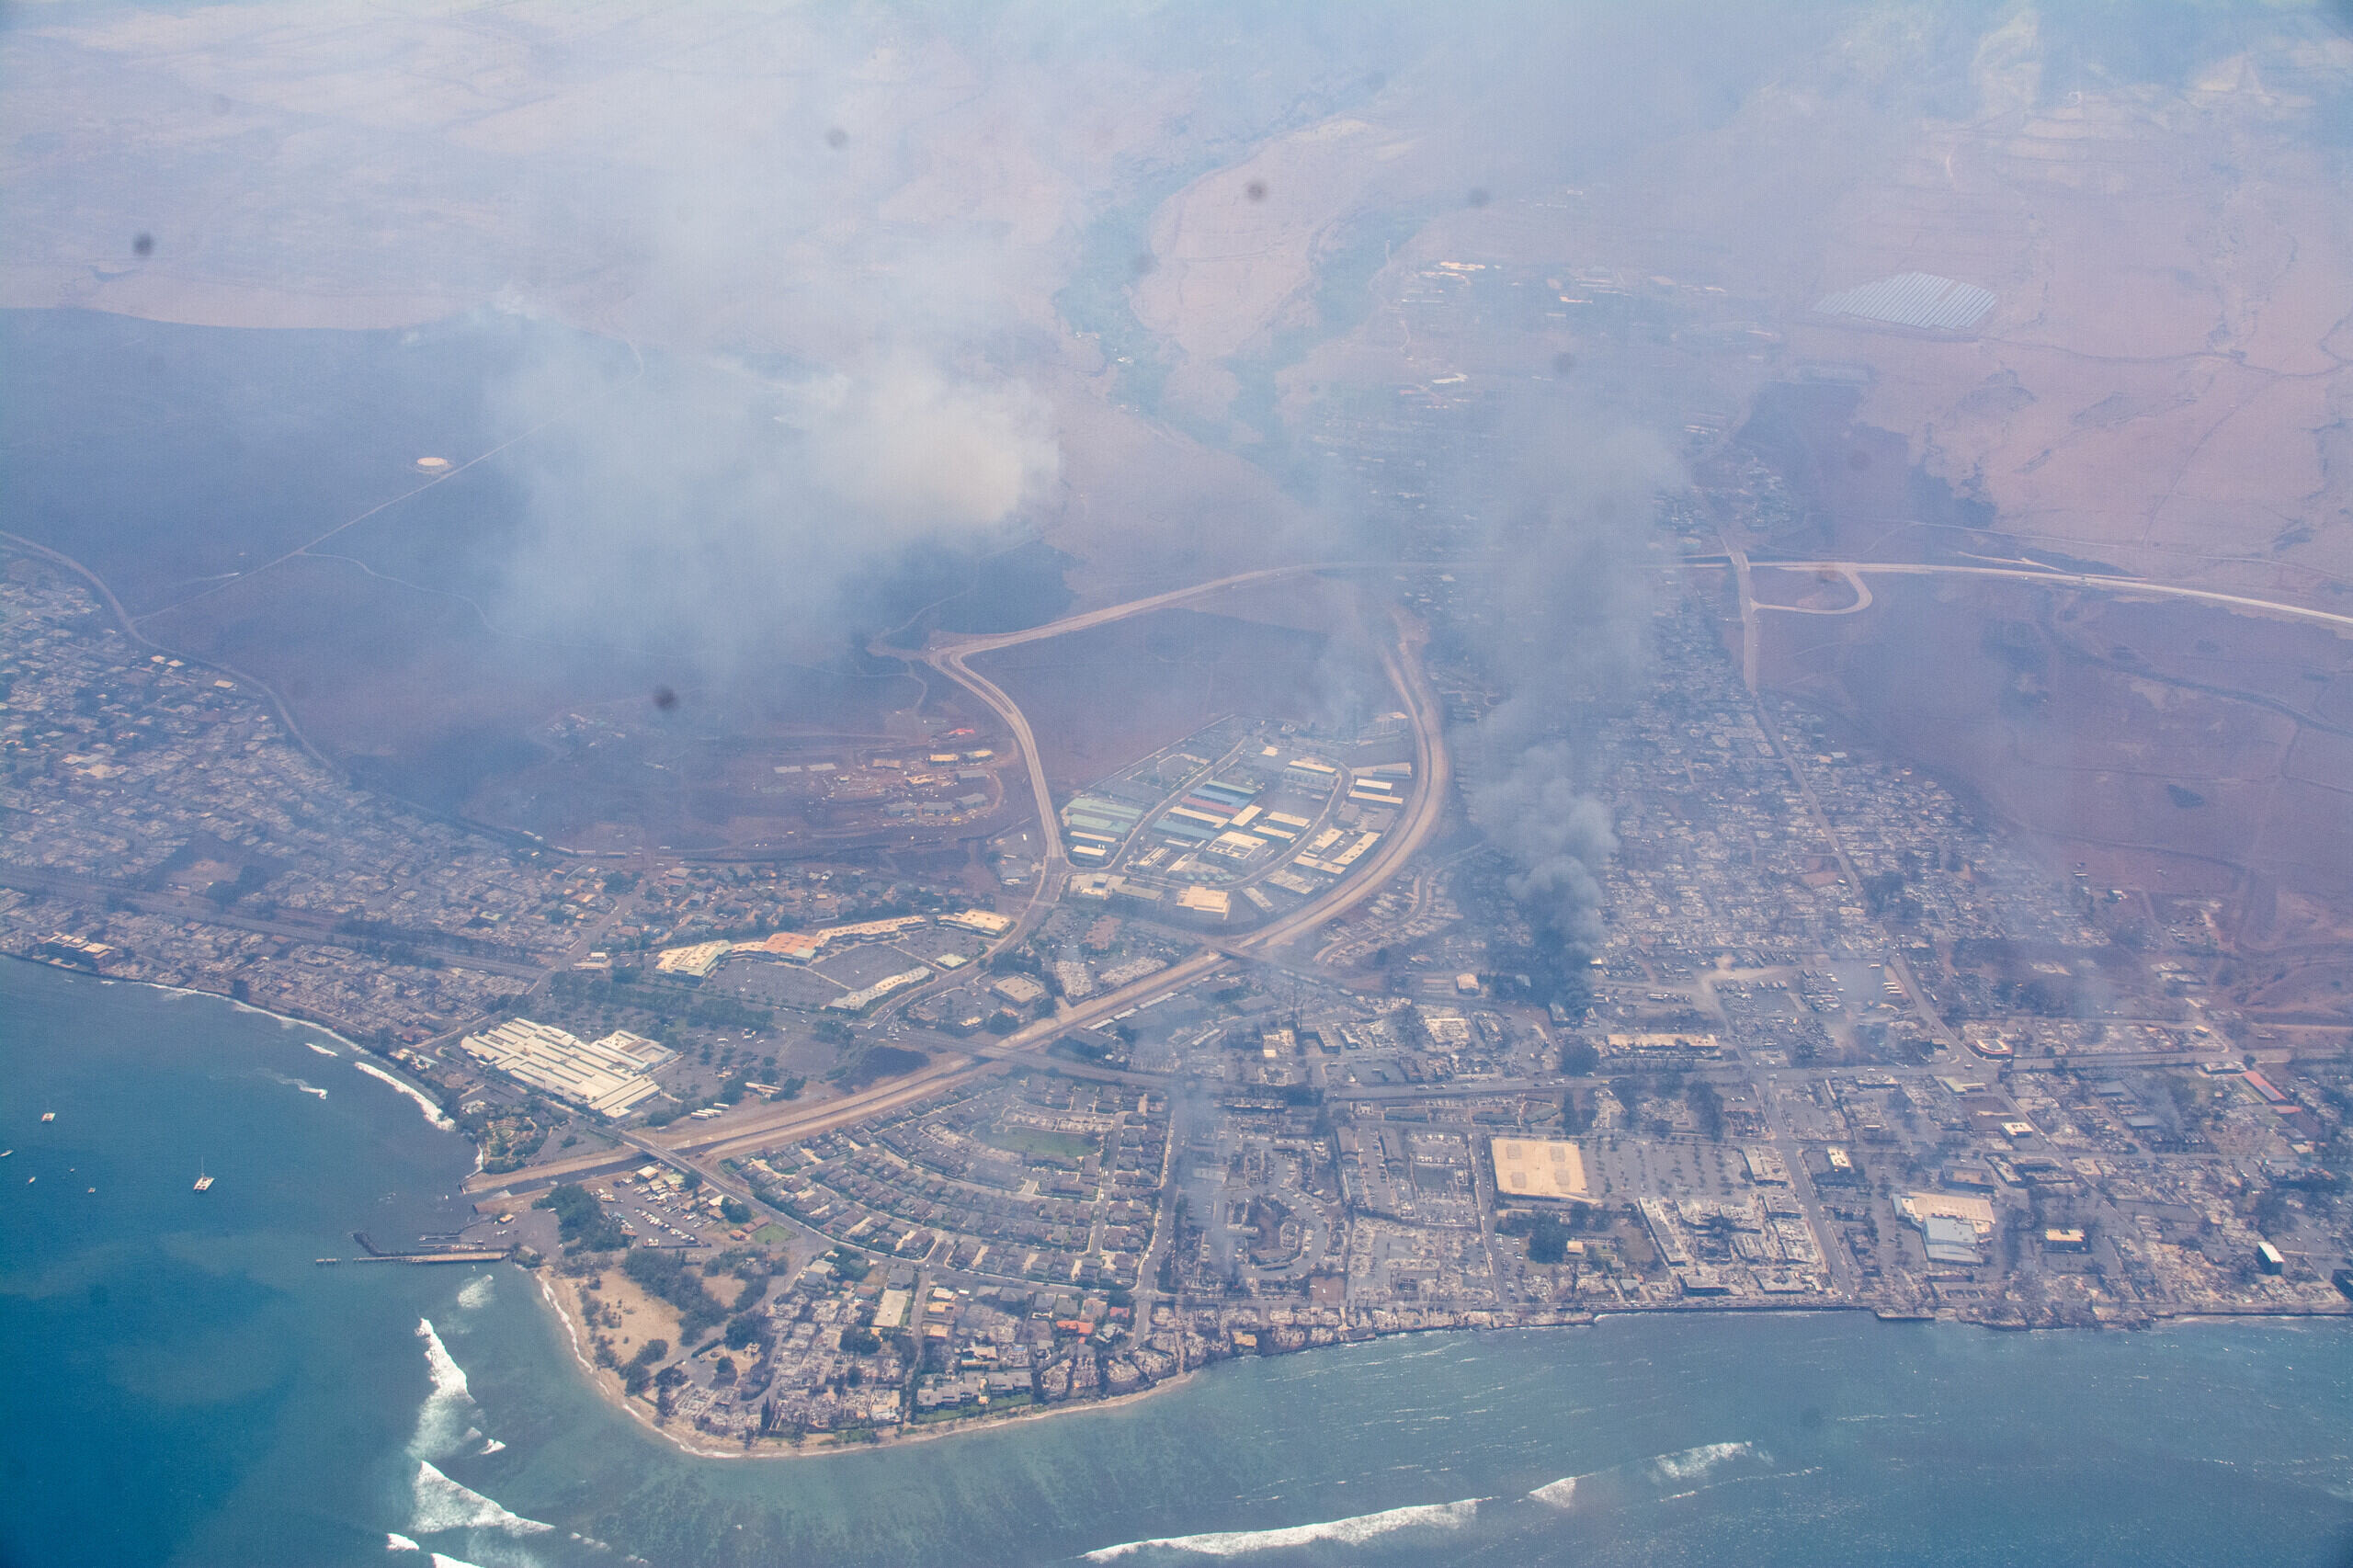 An aerial photo shows a ocean adjacent city in Maui burning with large plums of grey smoke.